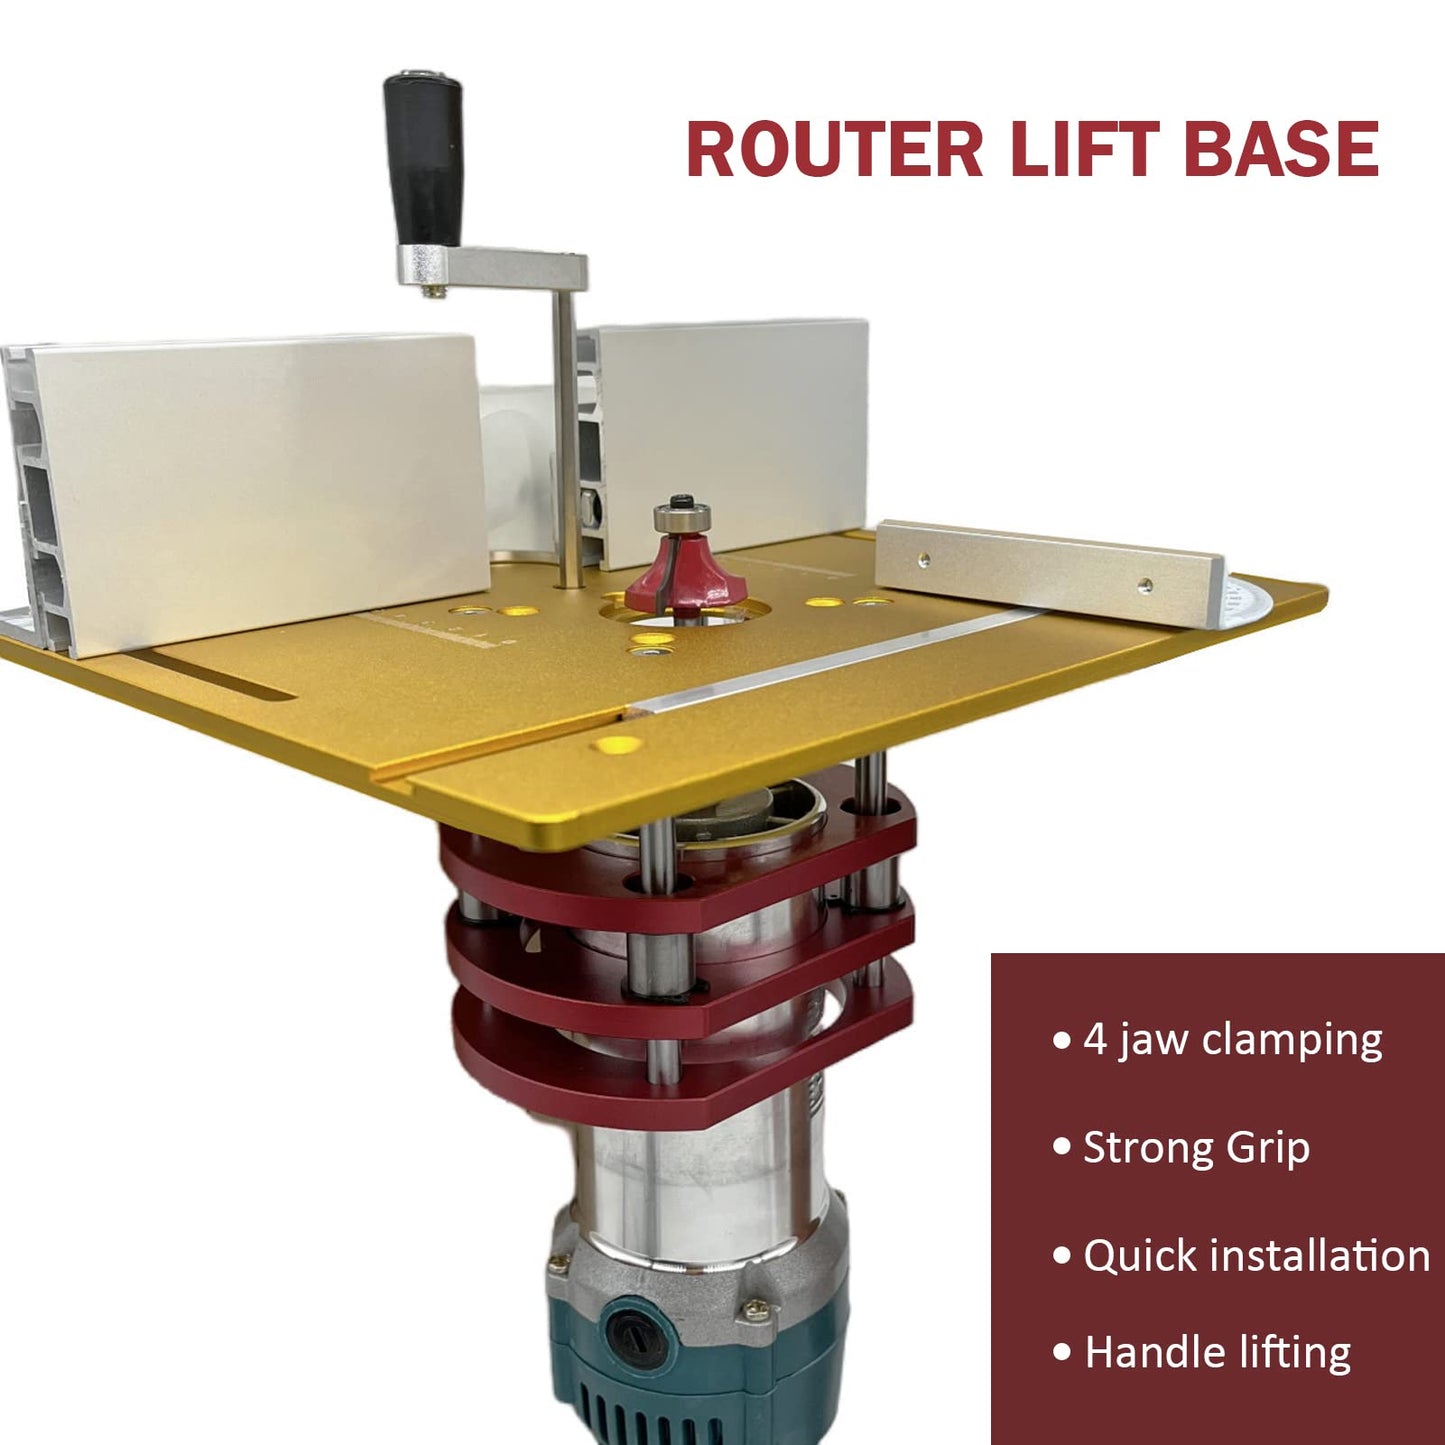 Router Lift, Metal Router Lift System Kit for Router Table Saw Insert Base Plate, 4 Jaw Clamping, Lift Only, No Template Insert Plate